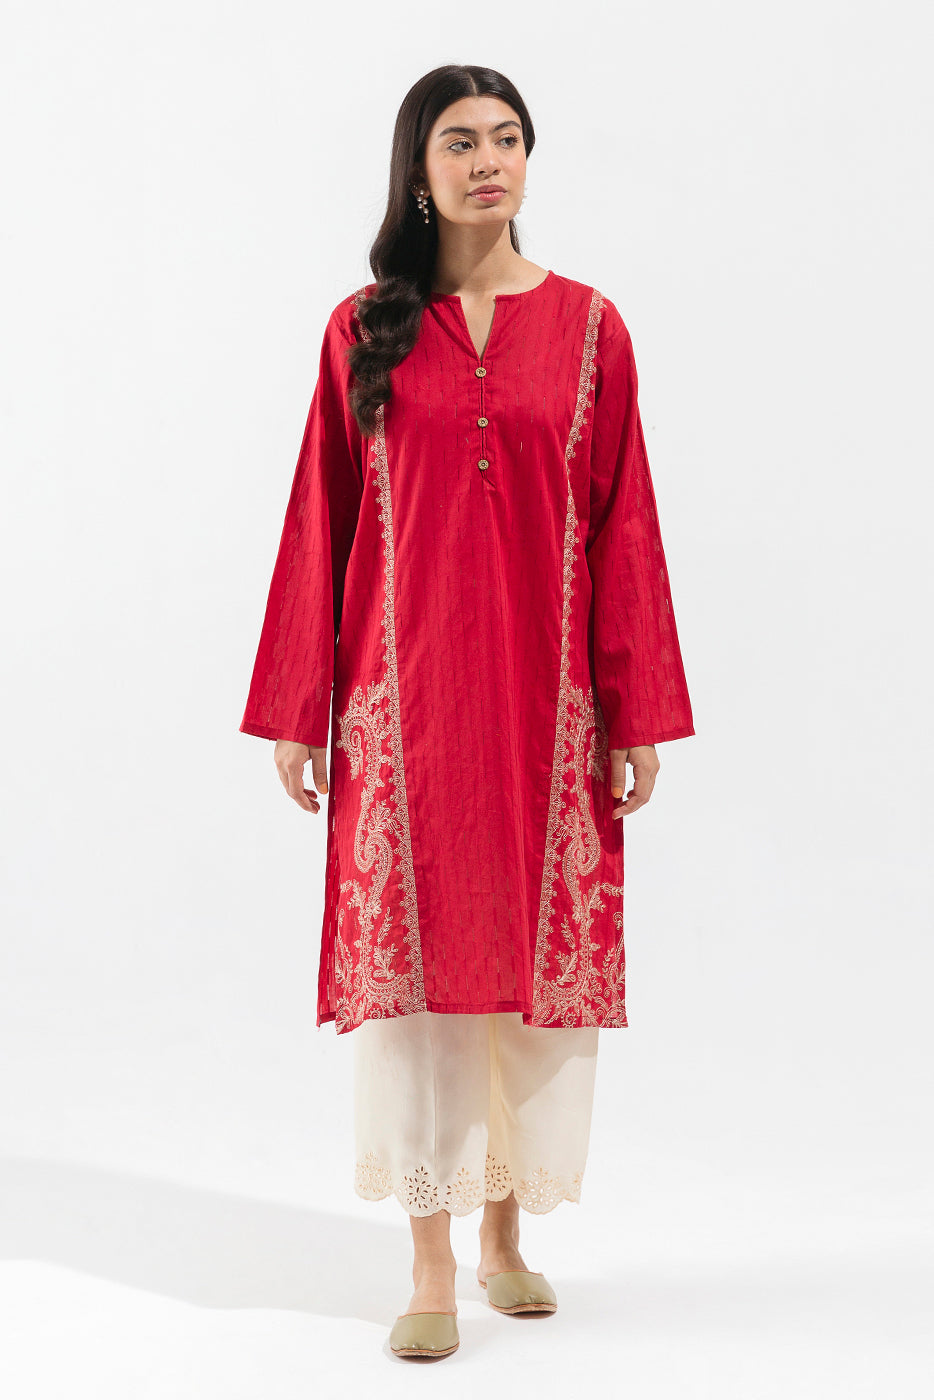 EMBROIDERED TEXTURED SHIRT (LUXURY PRET) - BEECHTREE